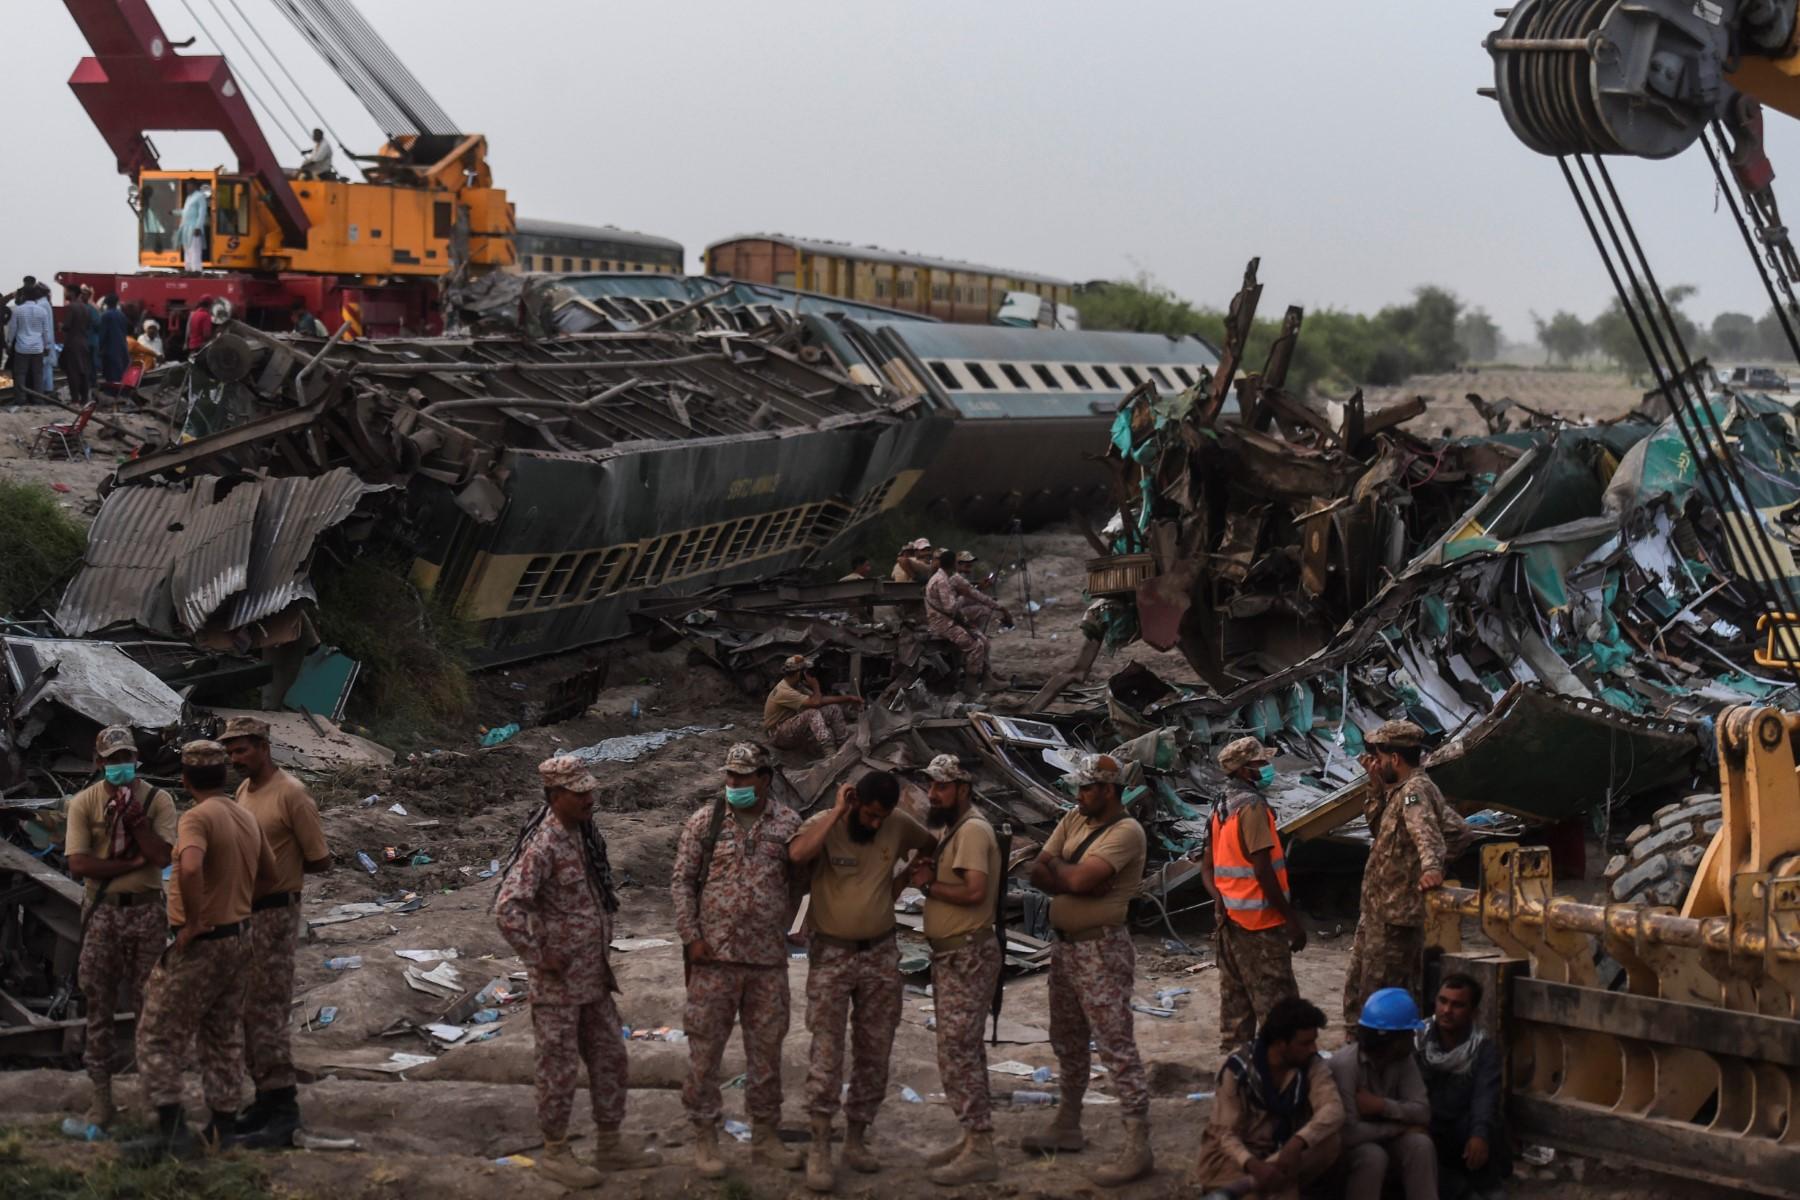 Security personnel gather at the site of a train accident in Daharki area of the northern Sindh province on June 7. Photo: AFP